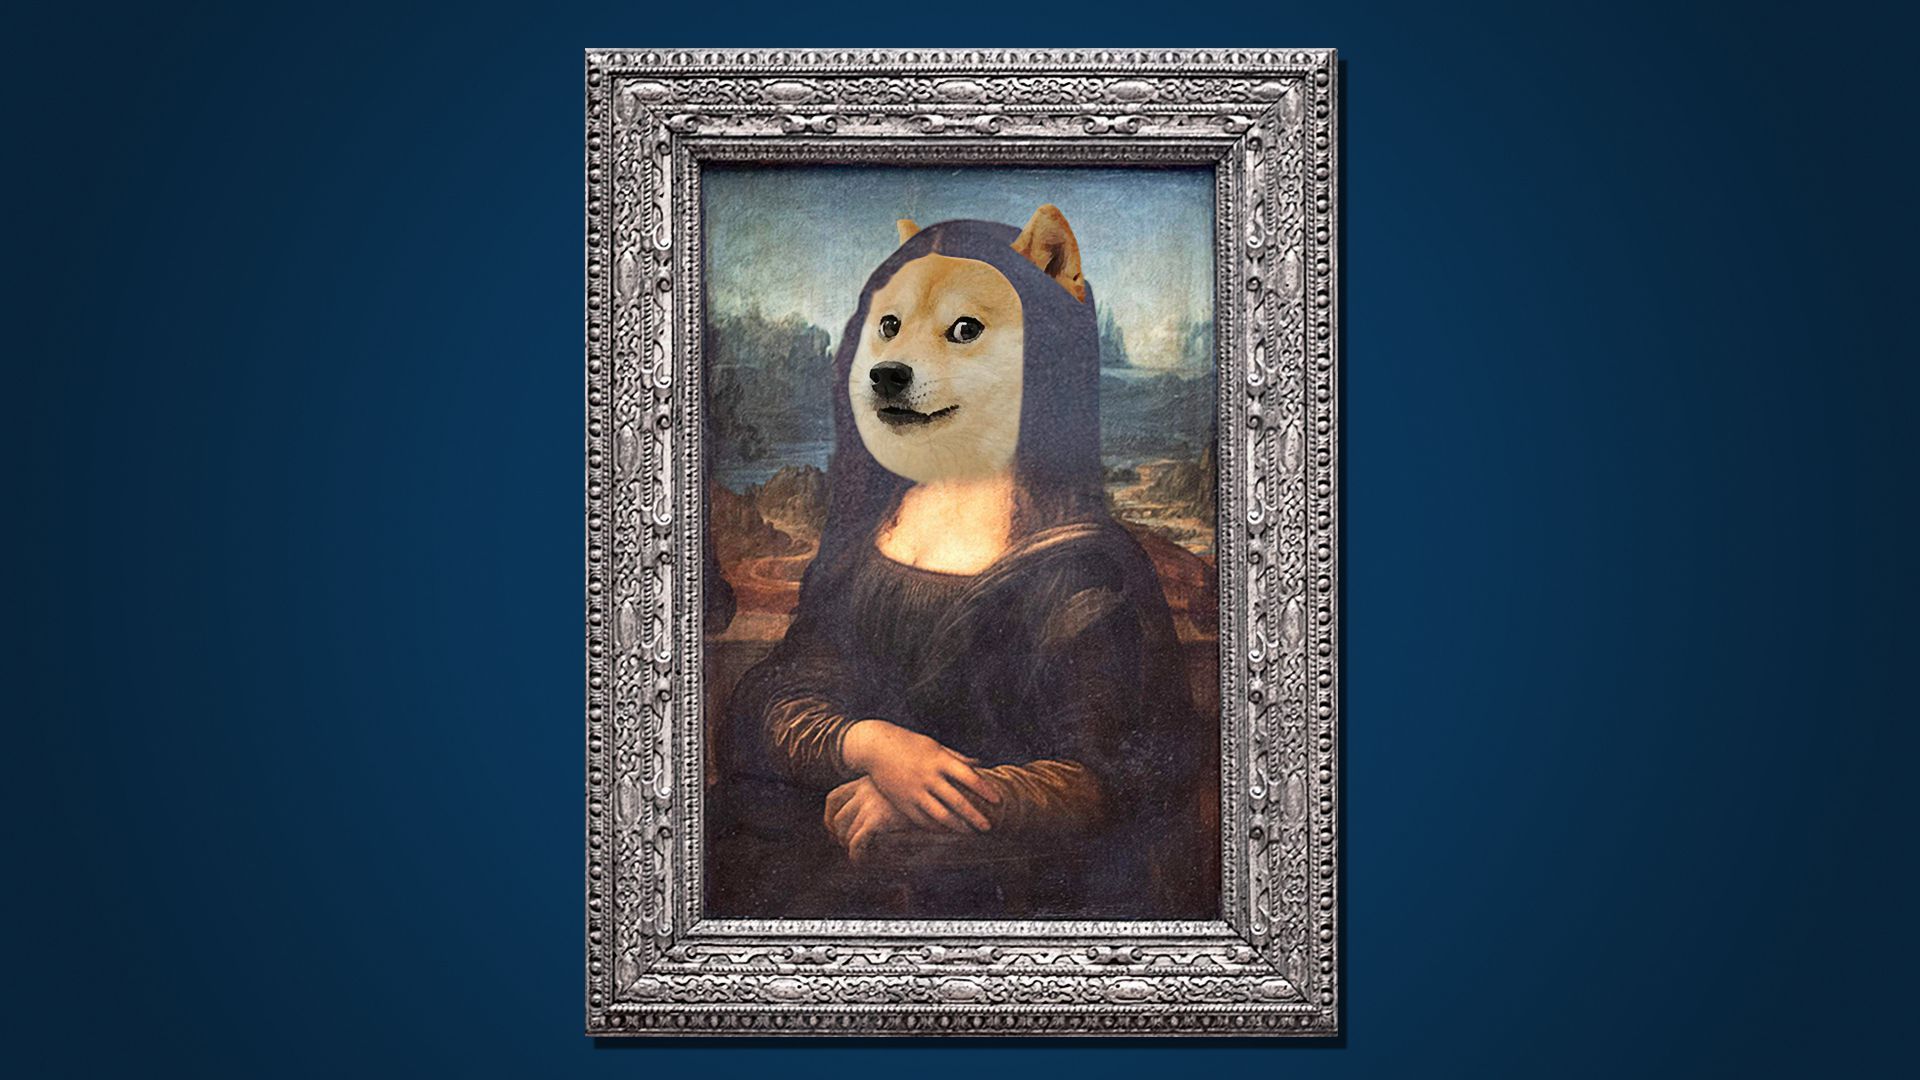 Illustration of the Doge head meme on the Mona Lisa in a framed painting.